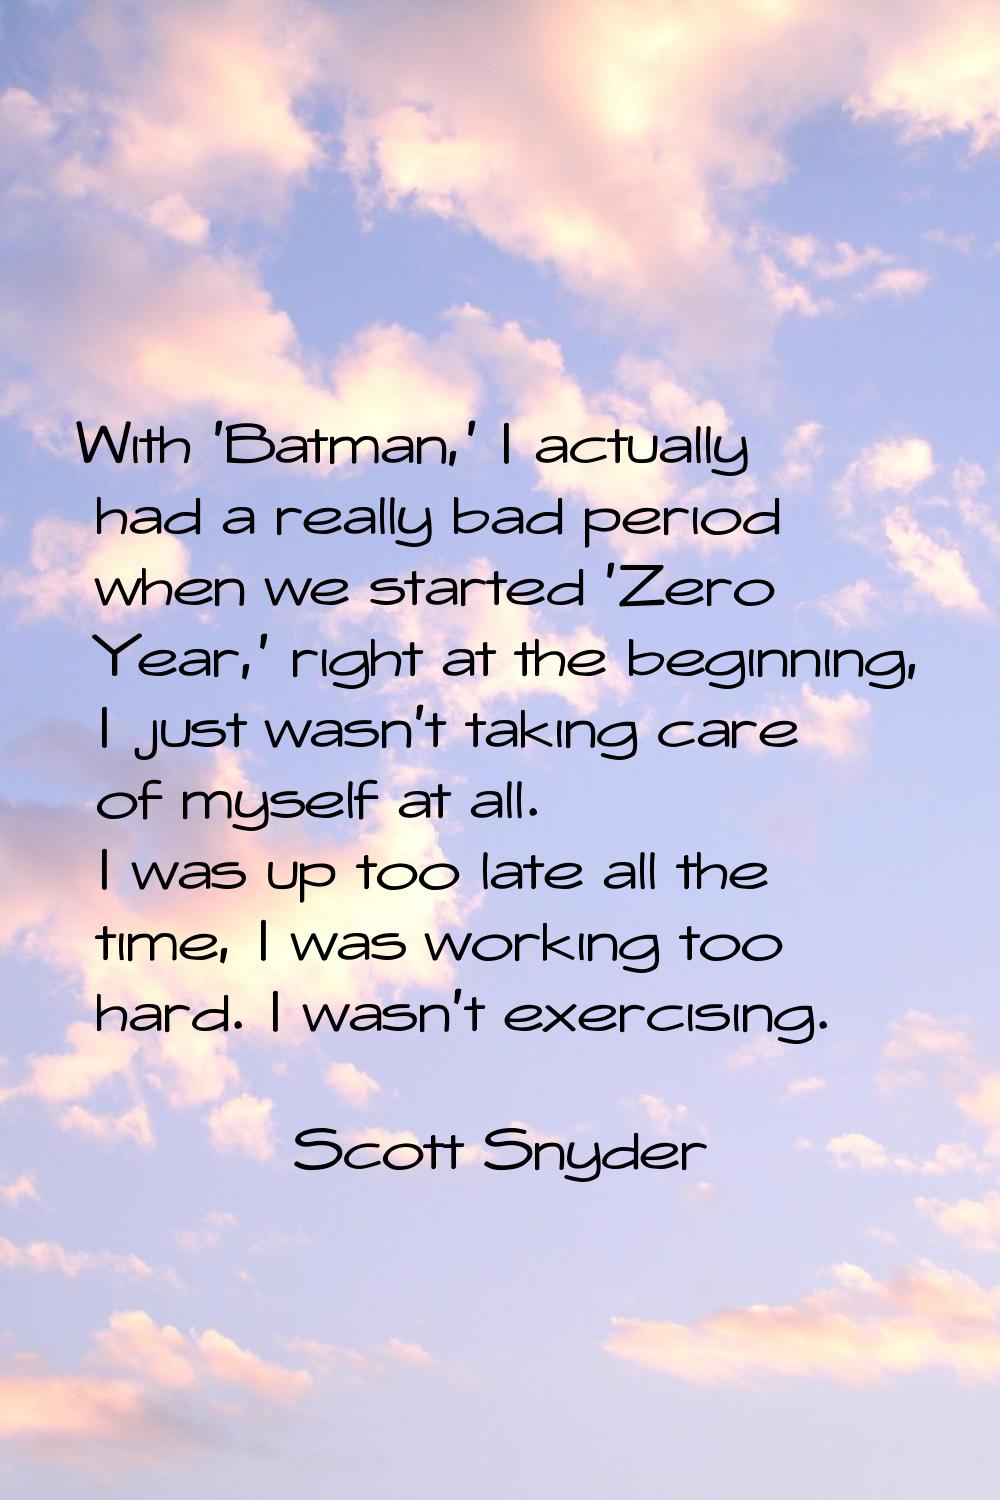 With 'Batman,' I actually had a really bad period when we started 'Zero Year,' right at the beginni